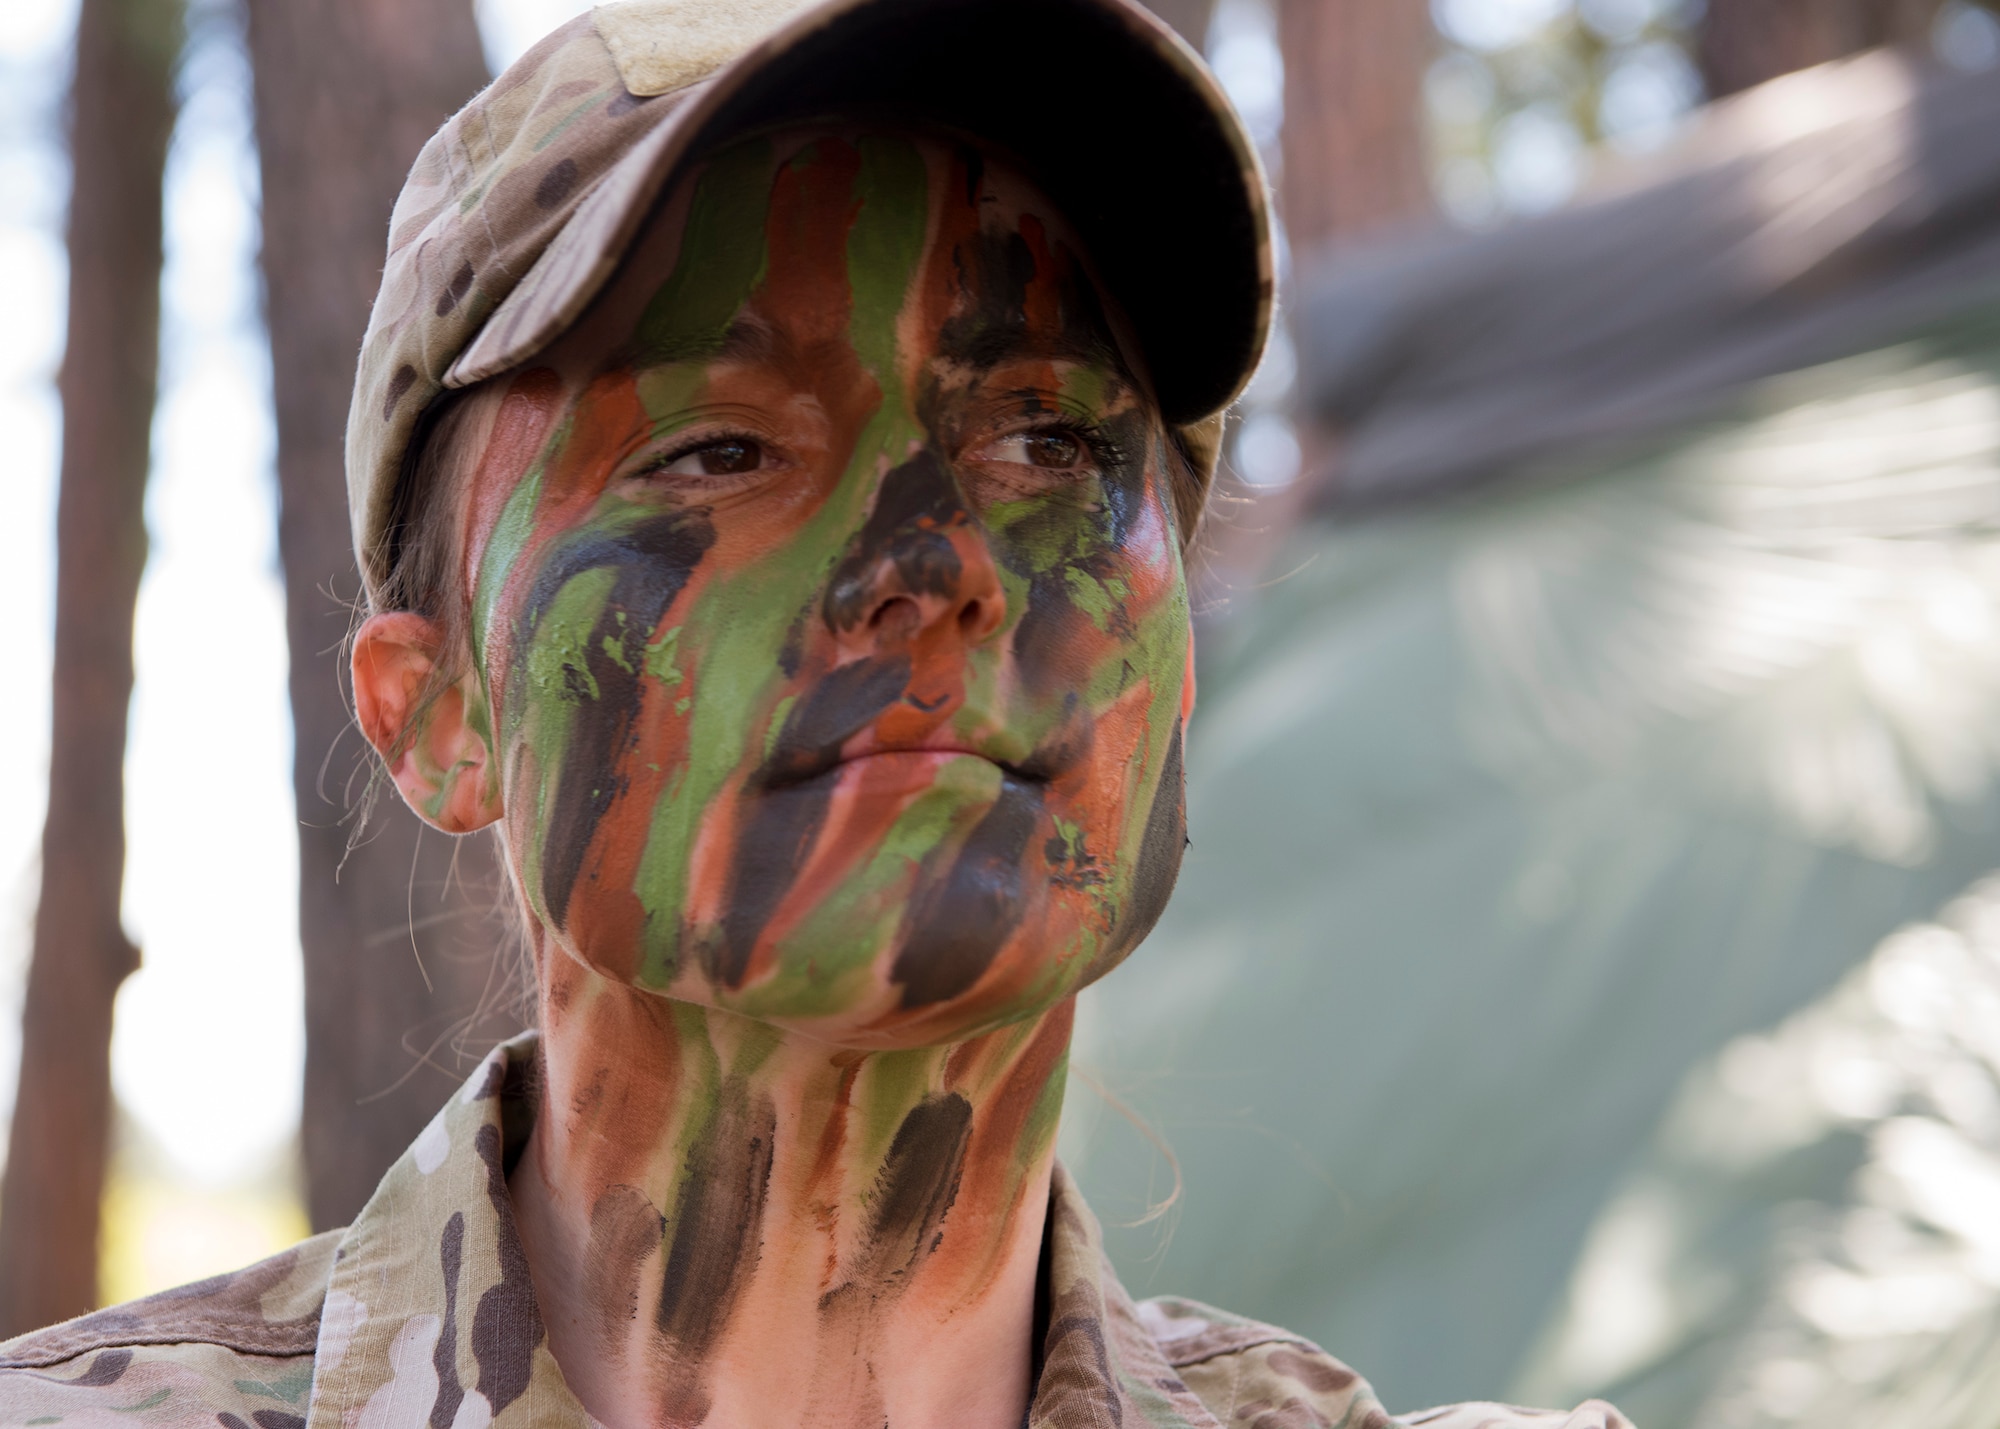 Senior Airman Brittany Wilson, 22nd Training Group survival specialist, displays face paint camouflage Apr. 28, 2017, at Fairchild Air Force Base, Washington. Avoiding detection and moving while camouflaged is a critical part of the evasion portion of survival training. (U.S. Air Force Photo / Airman 1st Class Ryan Lackey)